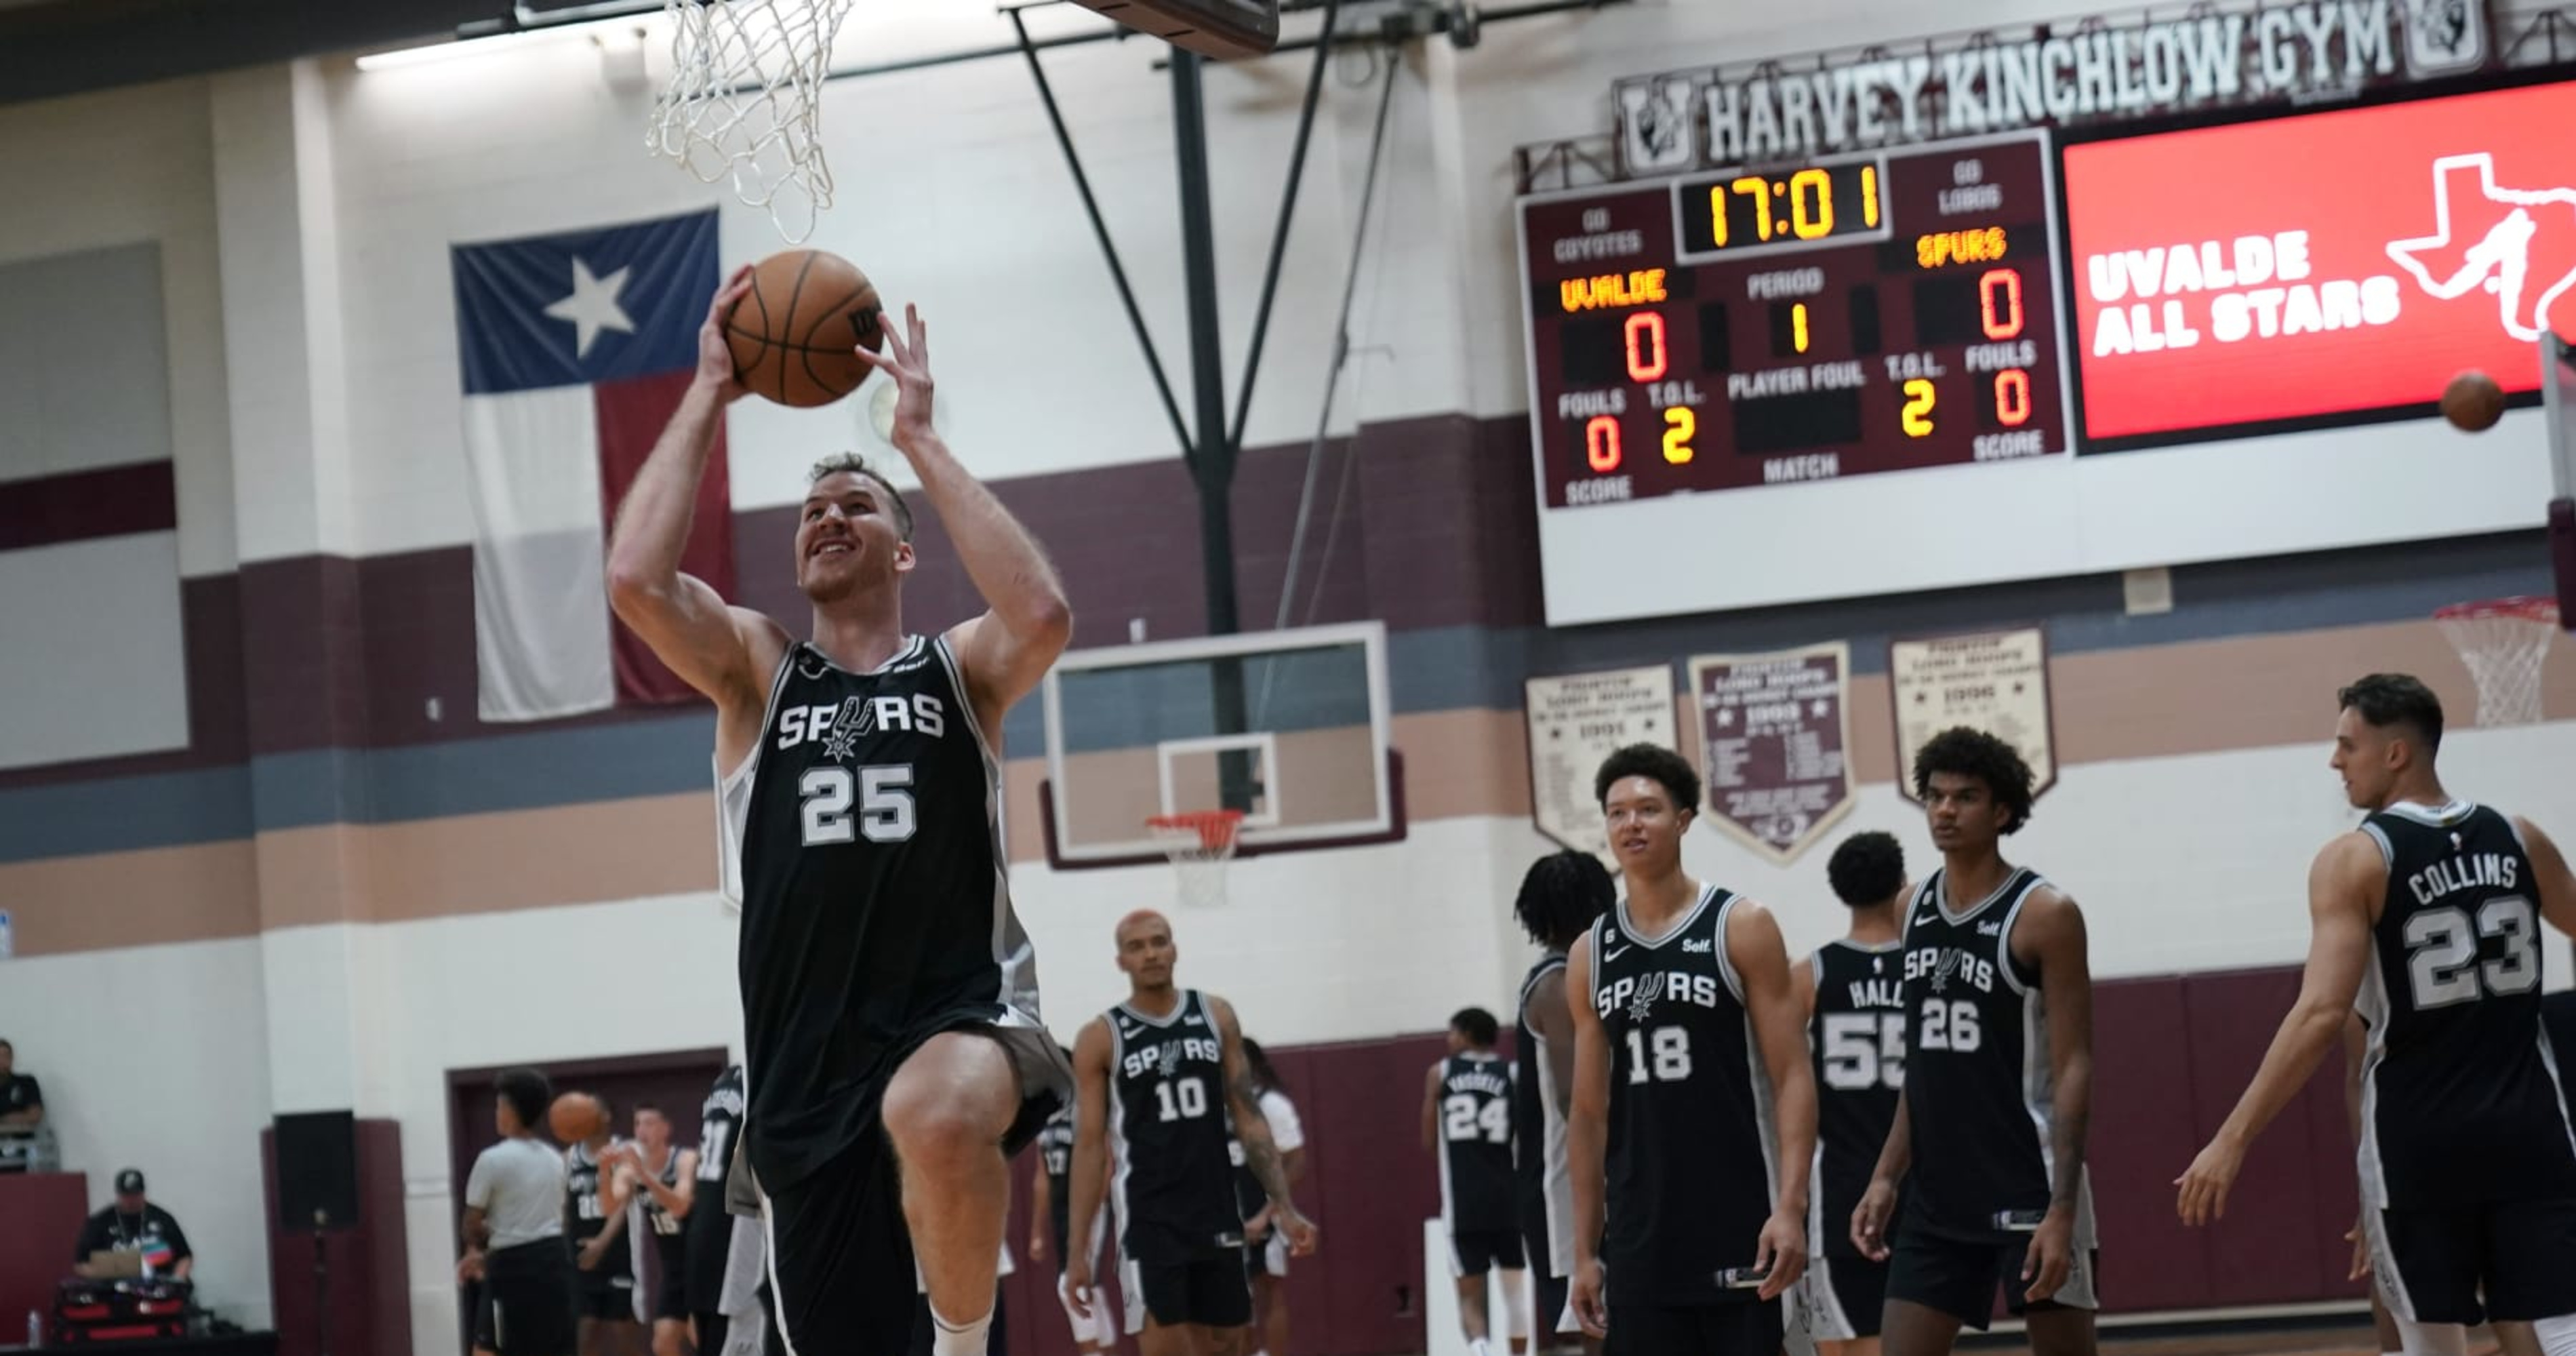 Spurs Hold Open Practice, Community Fair in Uvalde After School Shooting